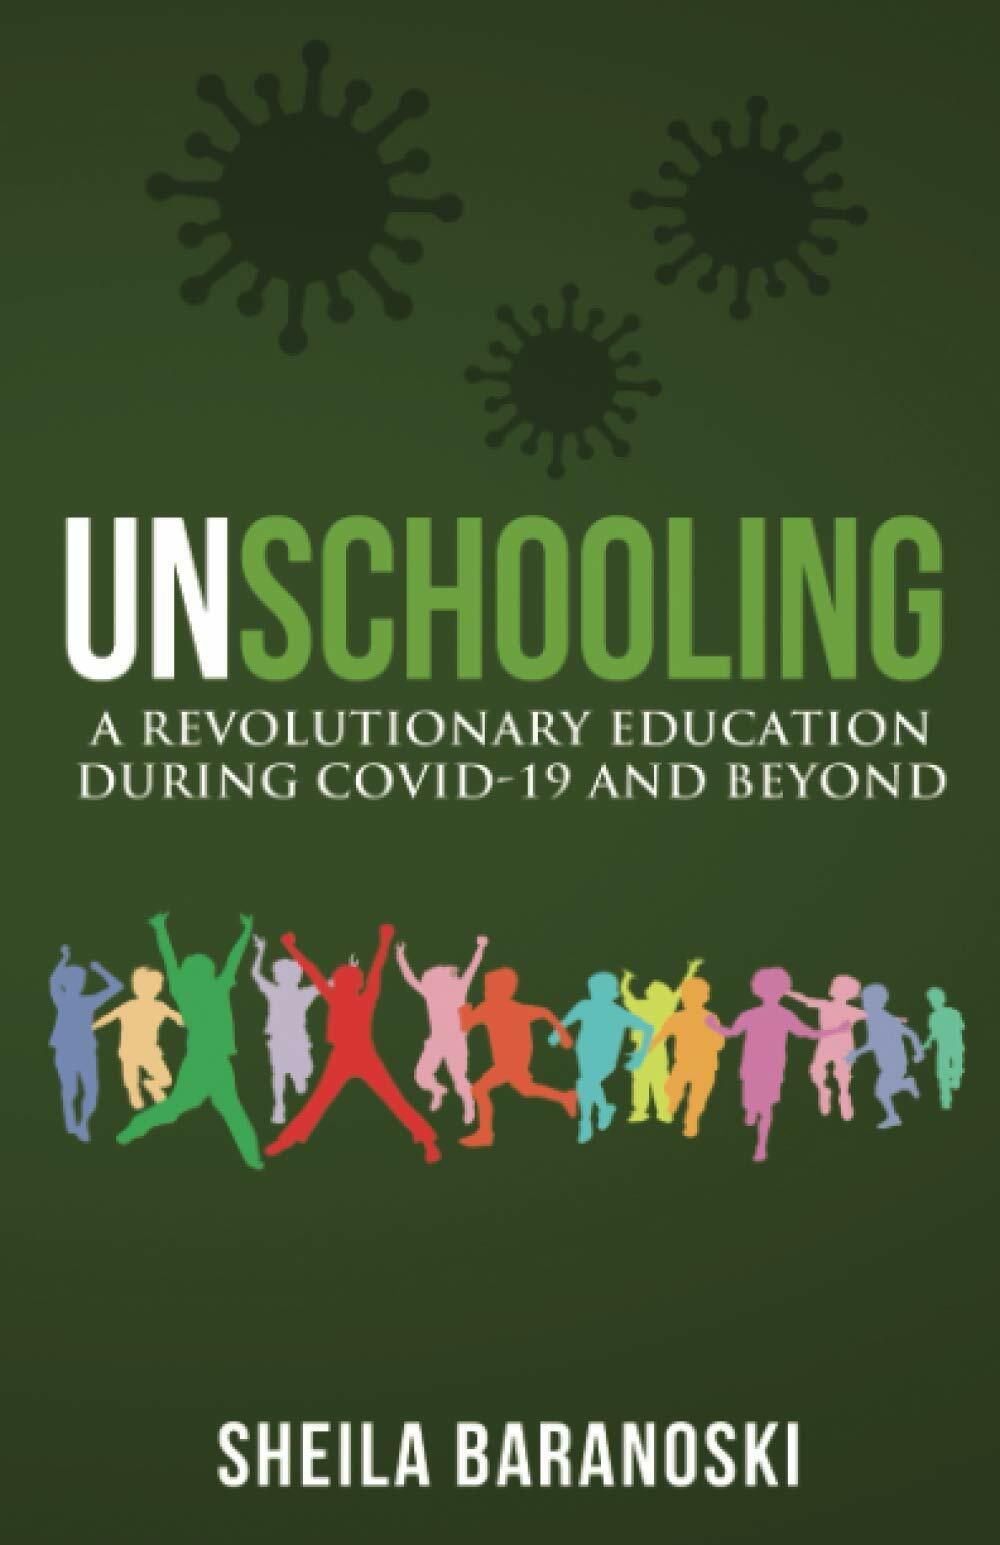 Unschooling: A Revolutionary Education During COVID-19 and Beyond (Paperback)